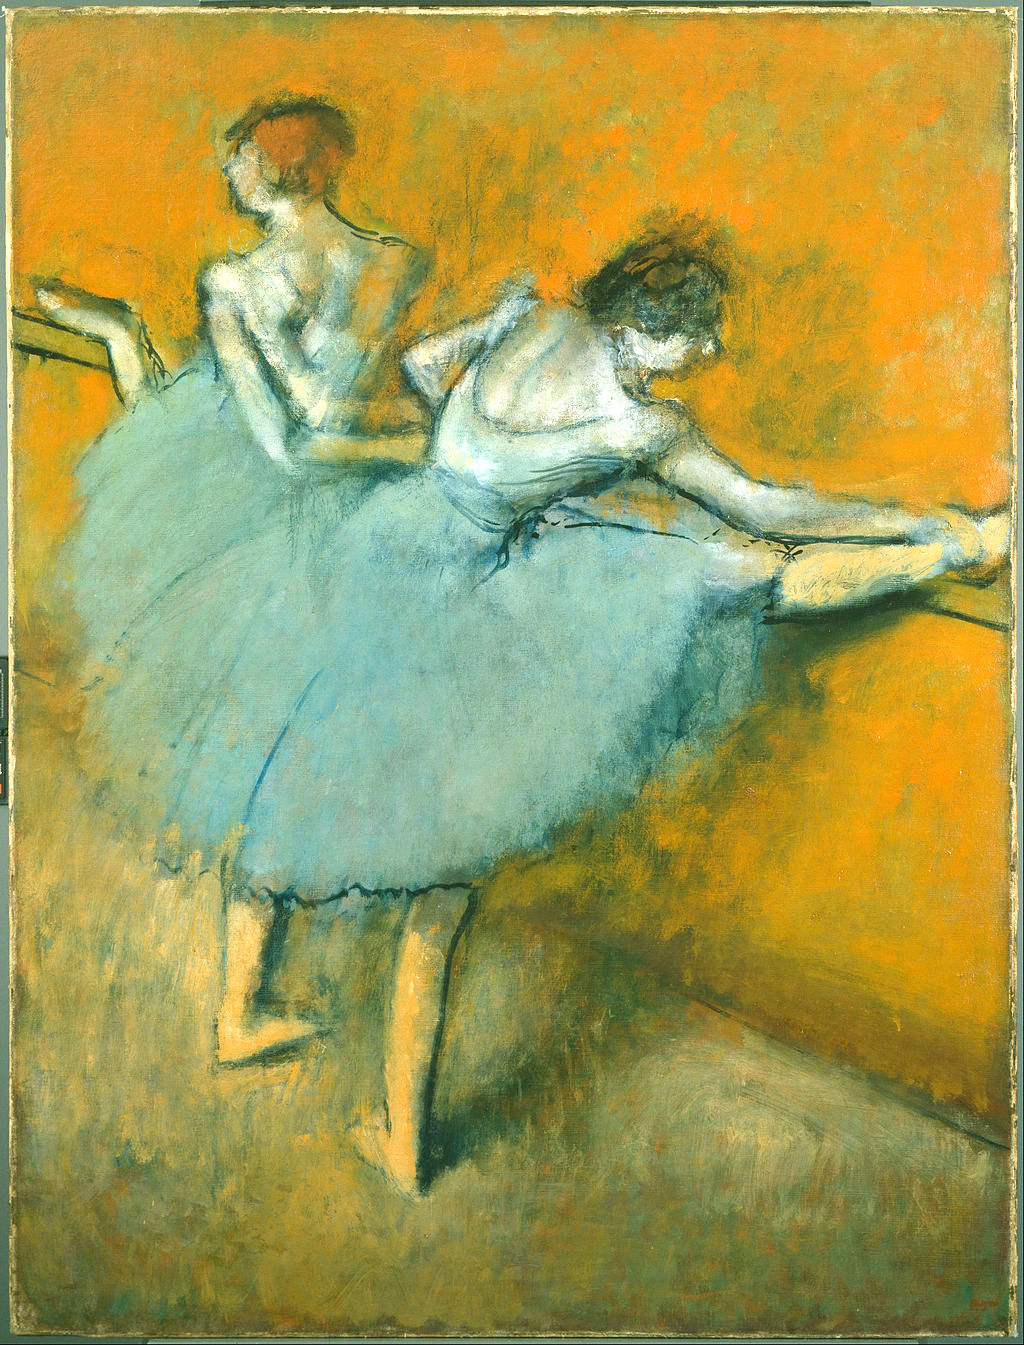 Dancers at the Bar, 1888 Painting by Edgar Degas Reproduction by Blue Surf Art .com